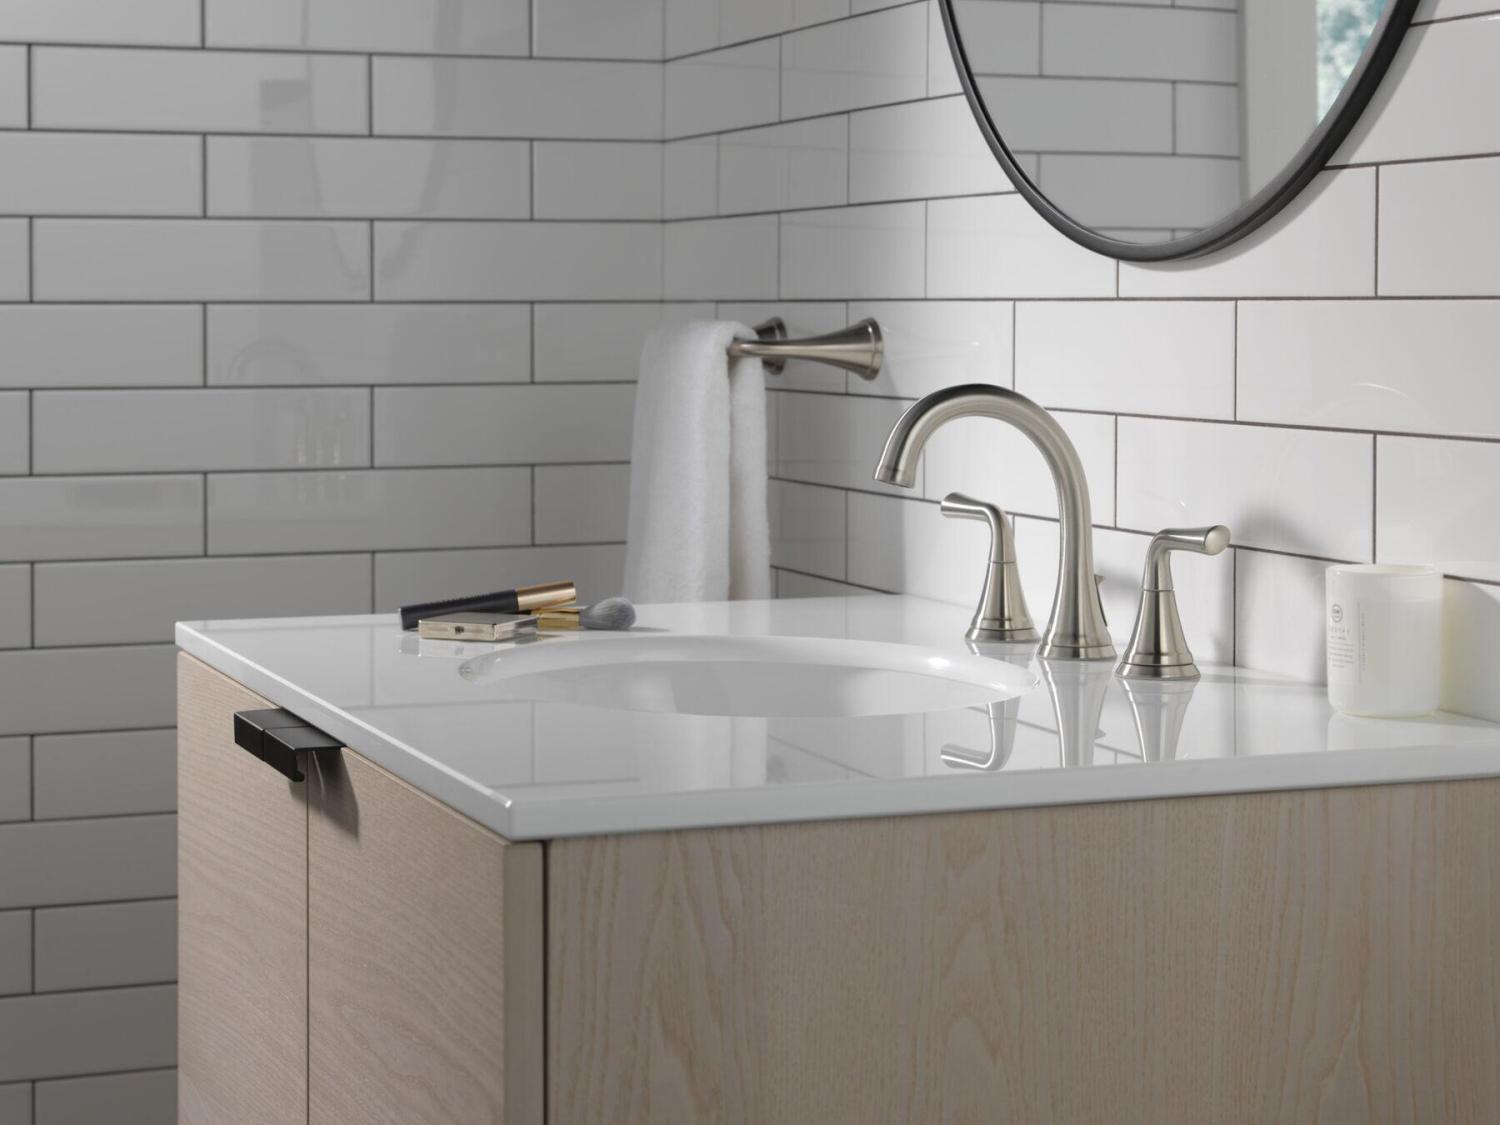 The Unveiled Dilemma of Peeling Brushed Nickel Faucets - Blog - 2